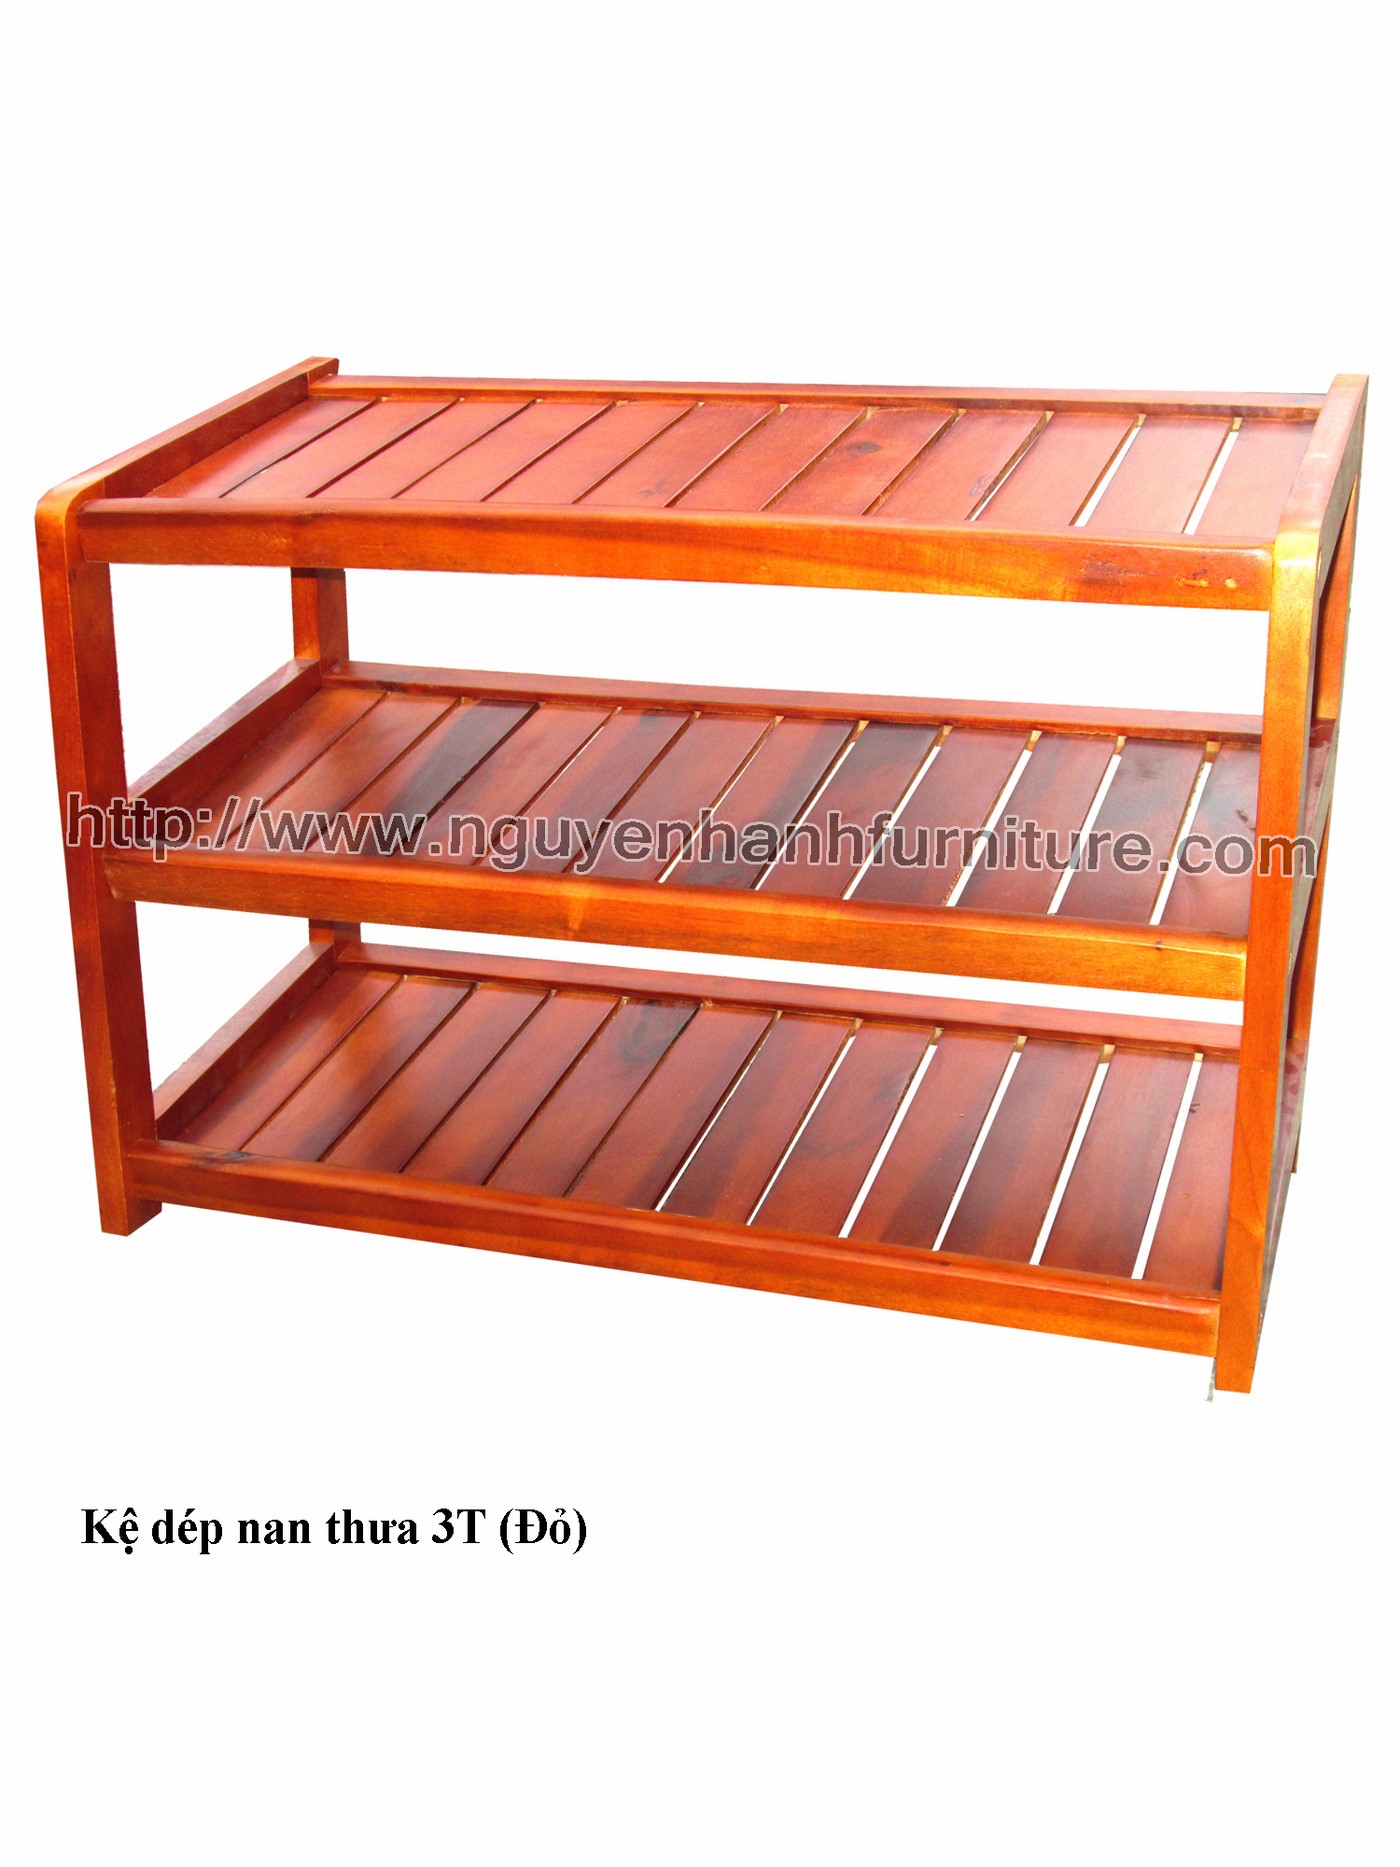 Name product: 3 storey Shoeshelf with sparse bladesn (Red) - Dimensions: 62 x 30 x 45 (H) - Description: Wood natural rubber